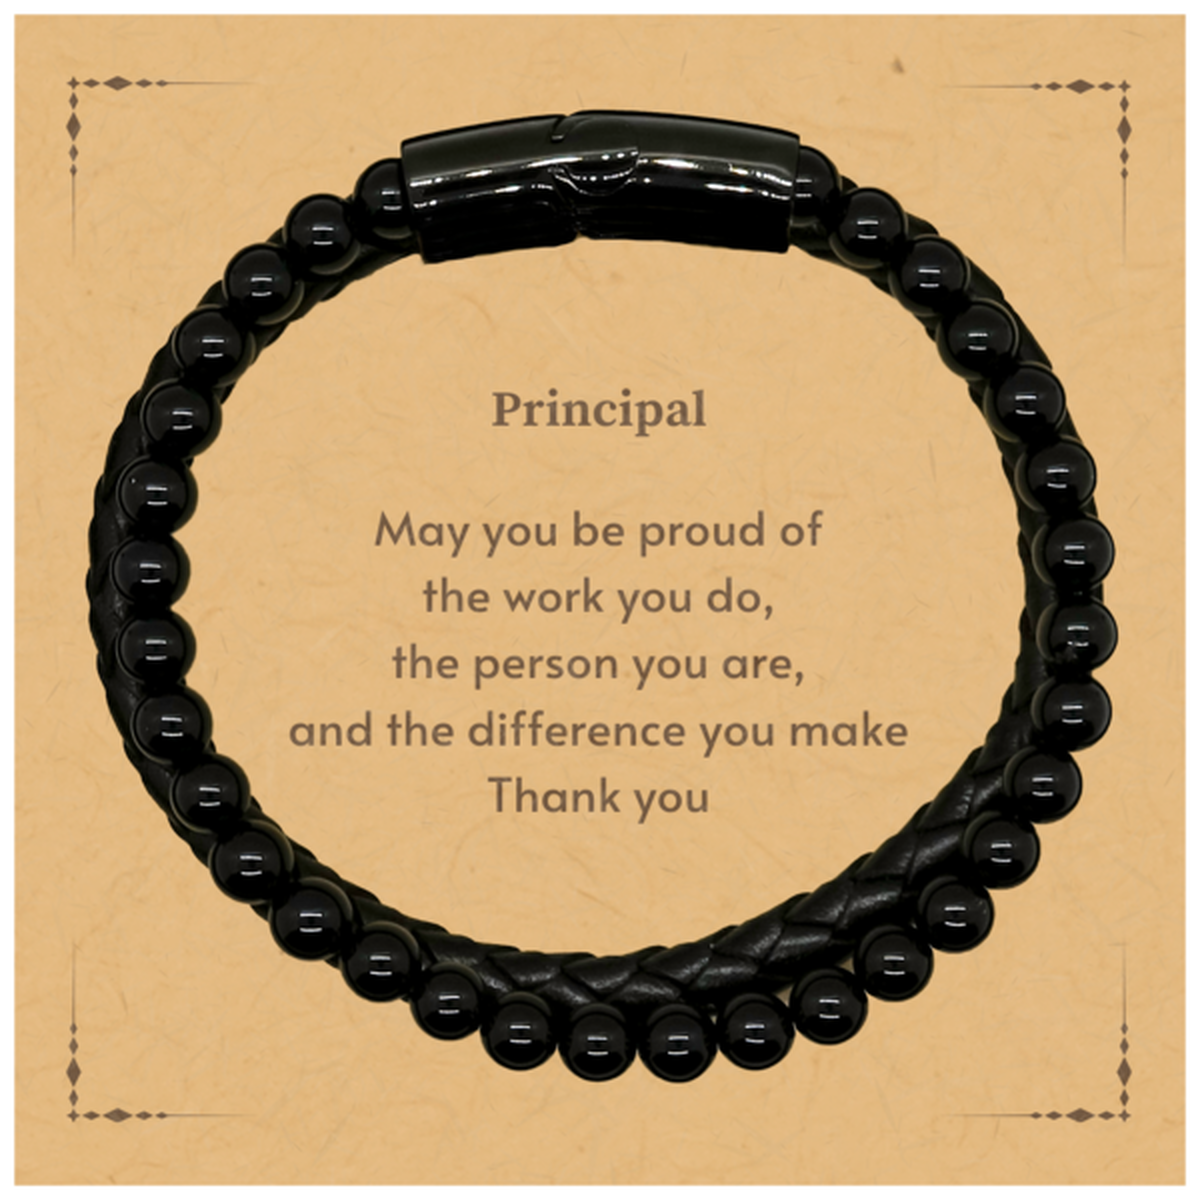 Heartwarming Stone Leather Bracelets Retirement Coworkers Gifts for Principal, Principal May You be proud of the work you do, the person you are Gifts for Boss Men Women Friends